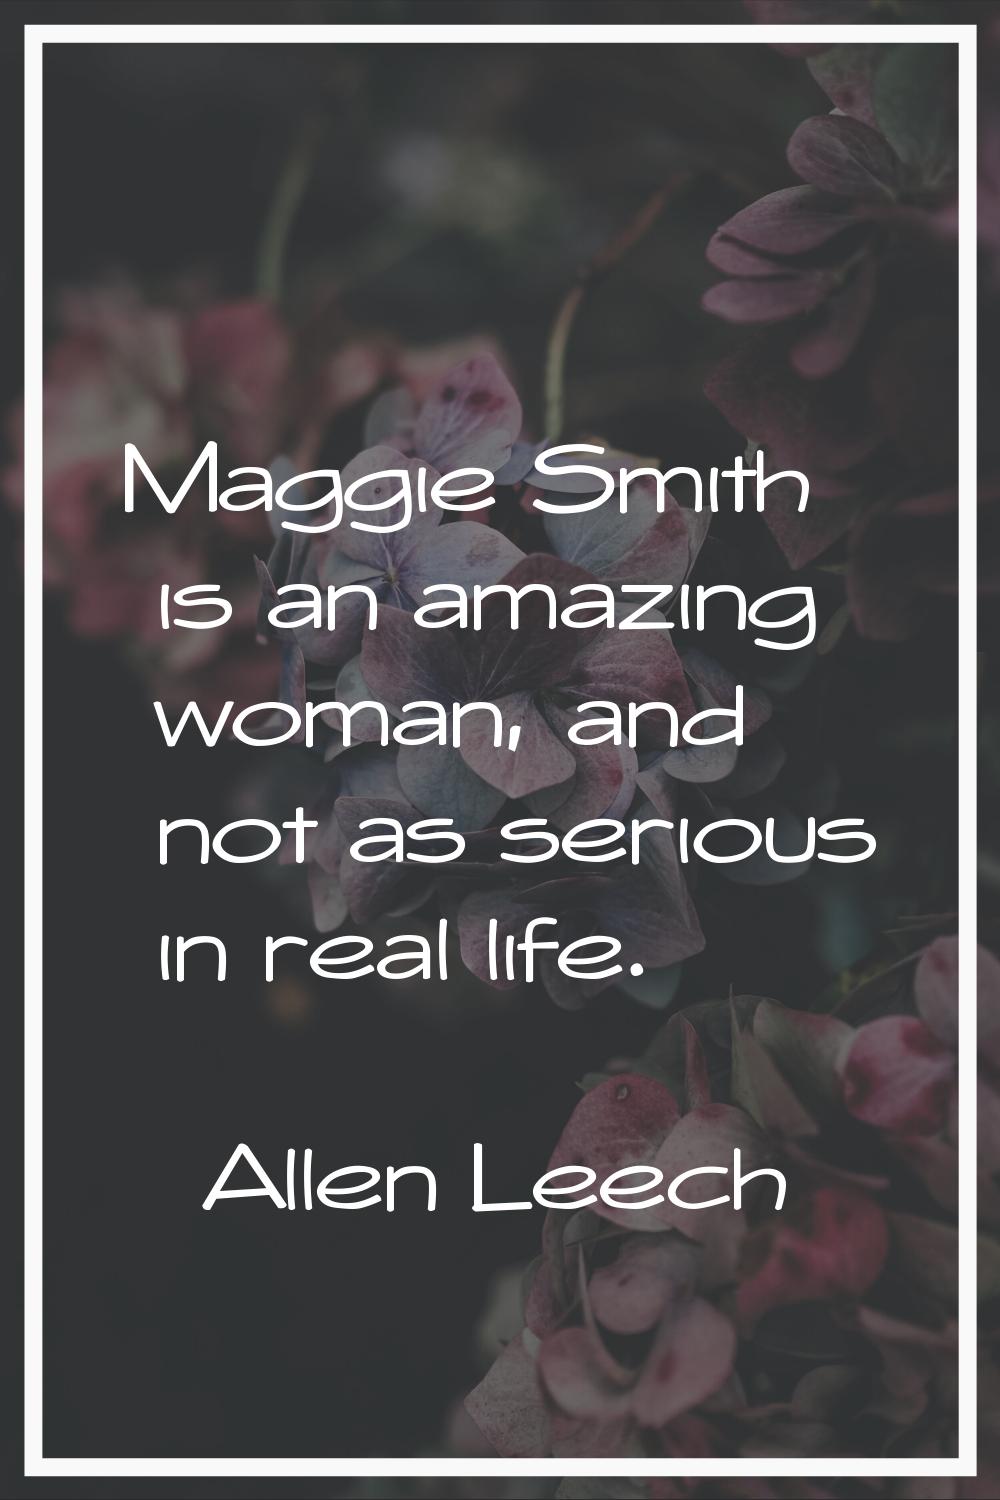 Maggie Smith is an amazing woman, and not as serious in real life.